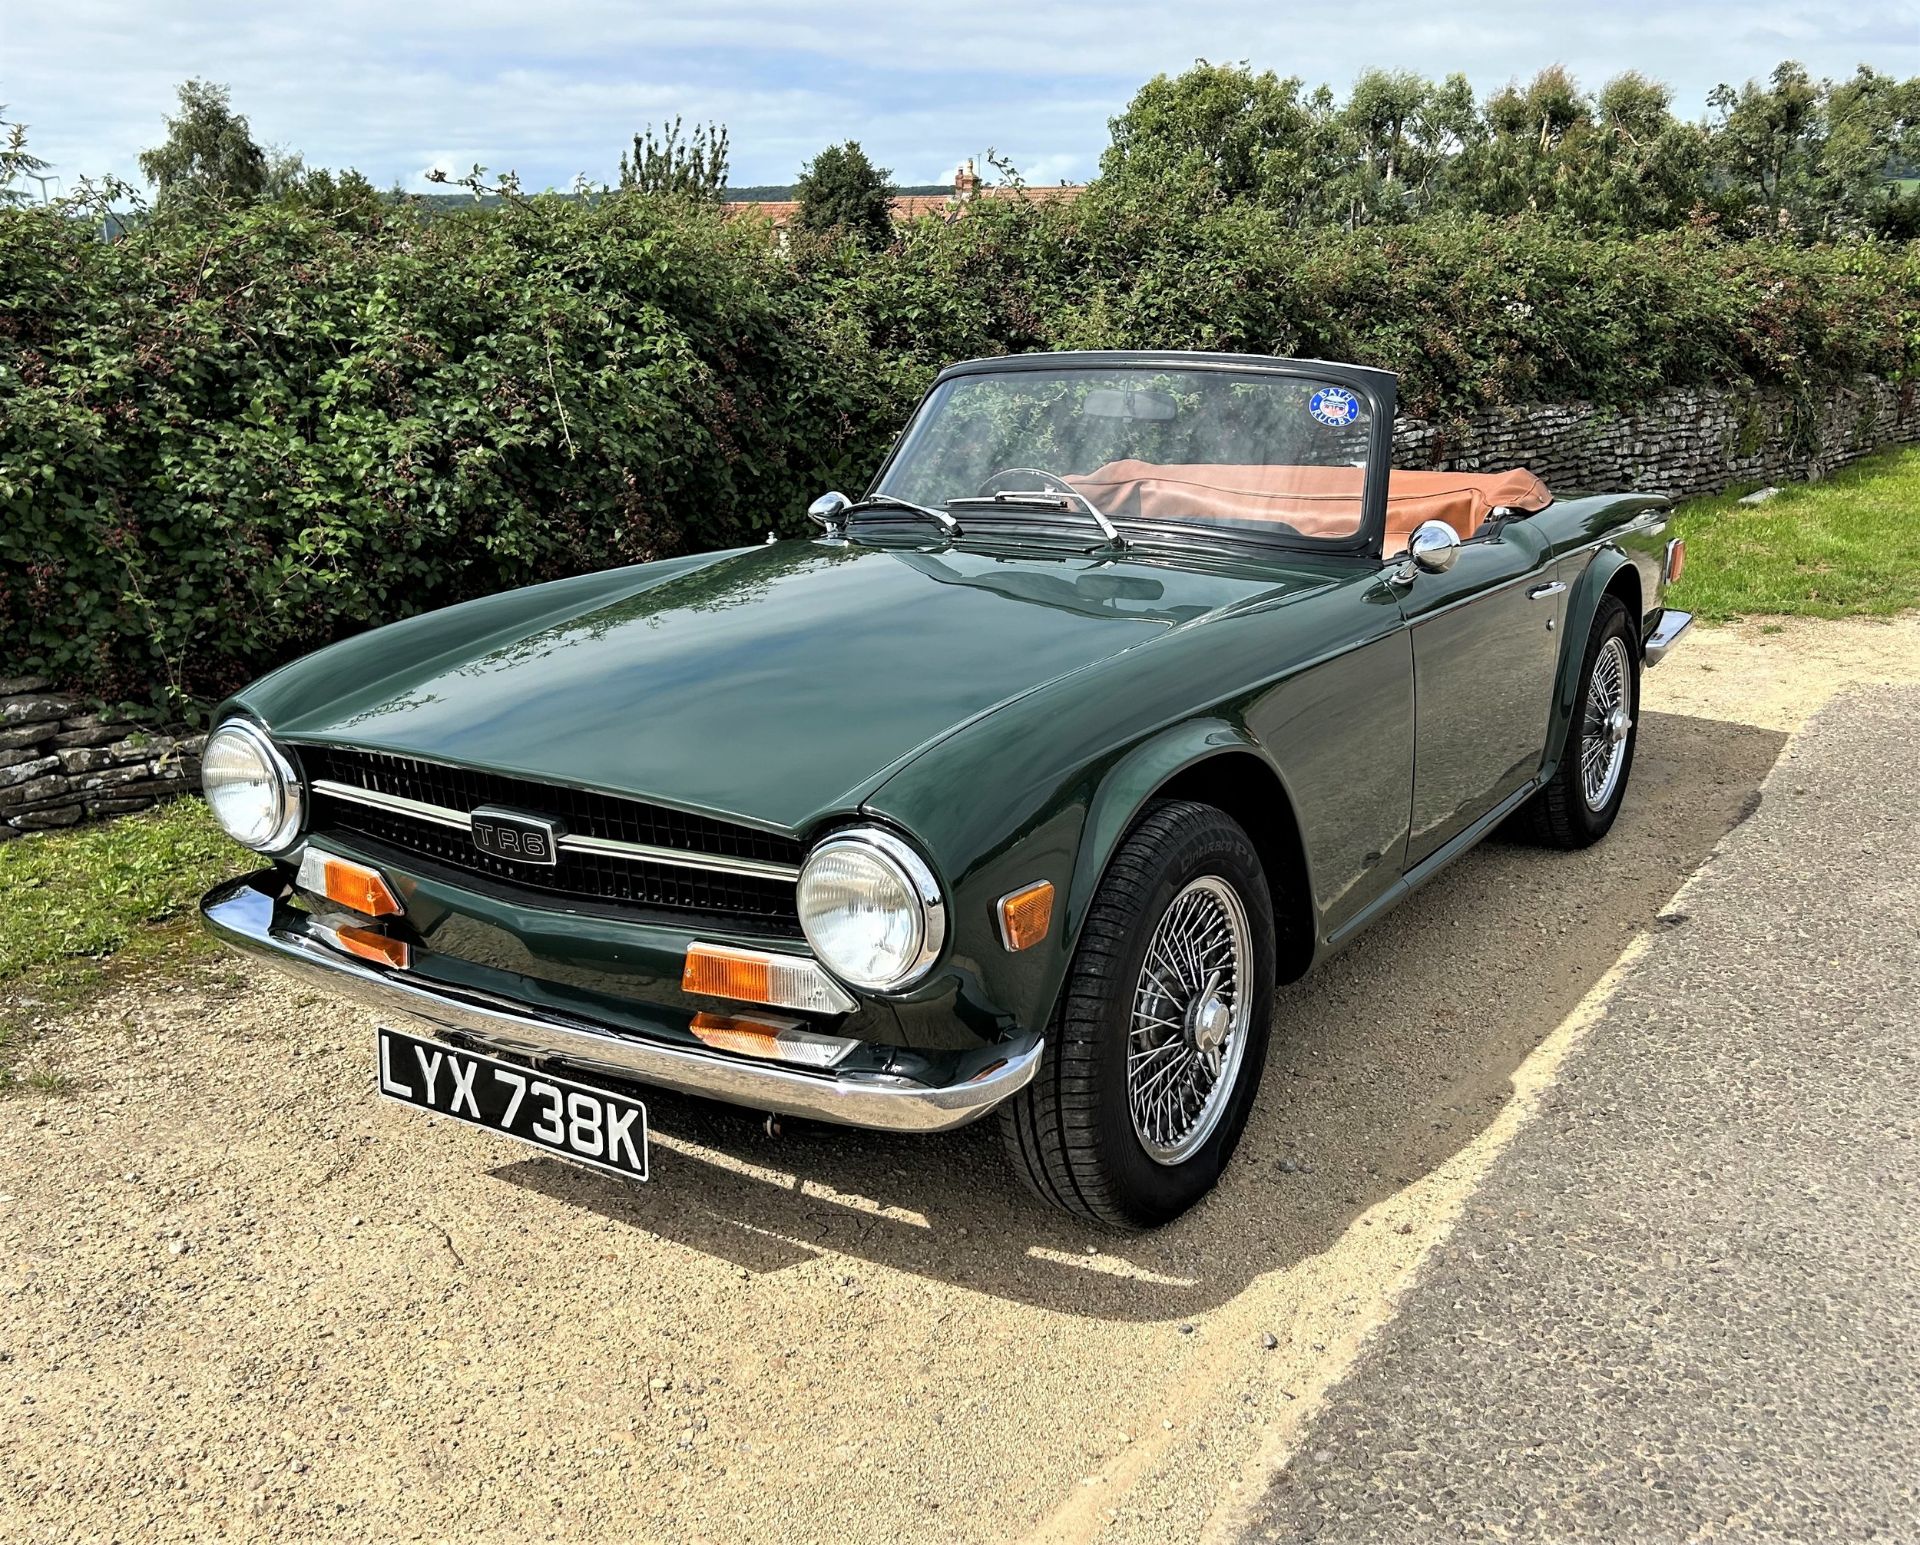 1971 TRIUMPH TR6 Registration Number: LYX 738K Chassis Number: CP54550-0 - UK-delivered, 150bhp - Image 31 of 33